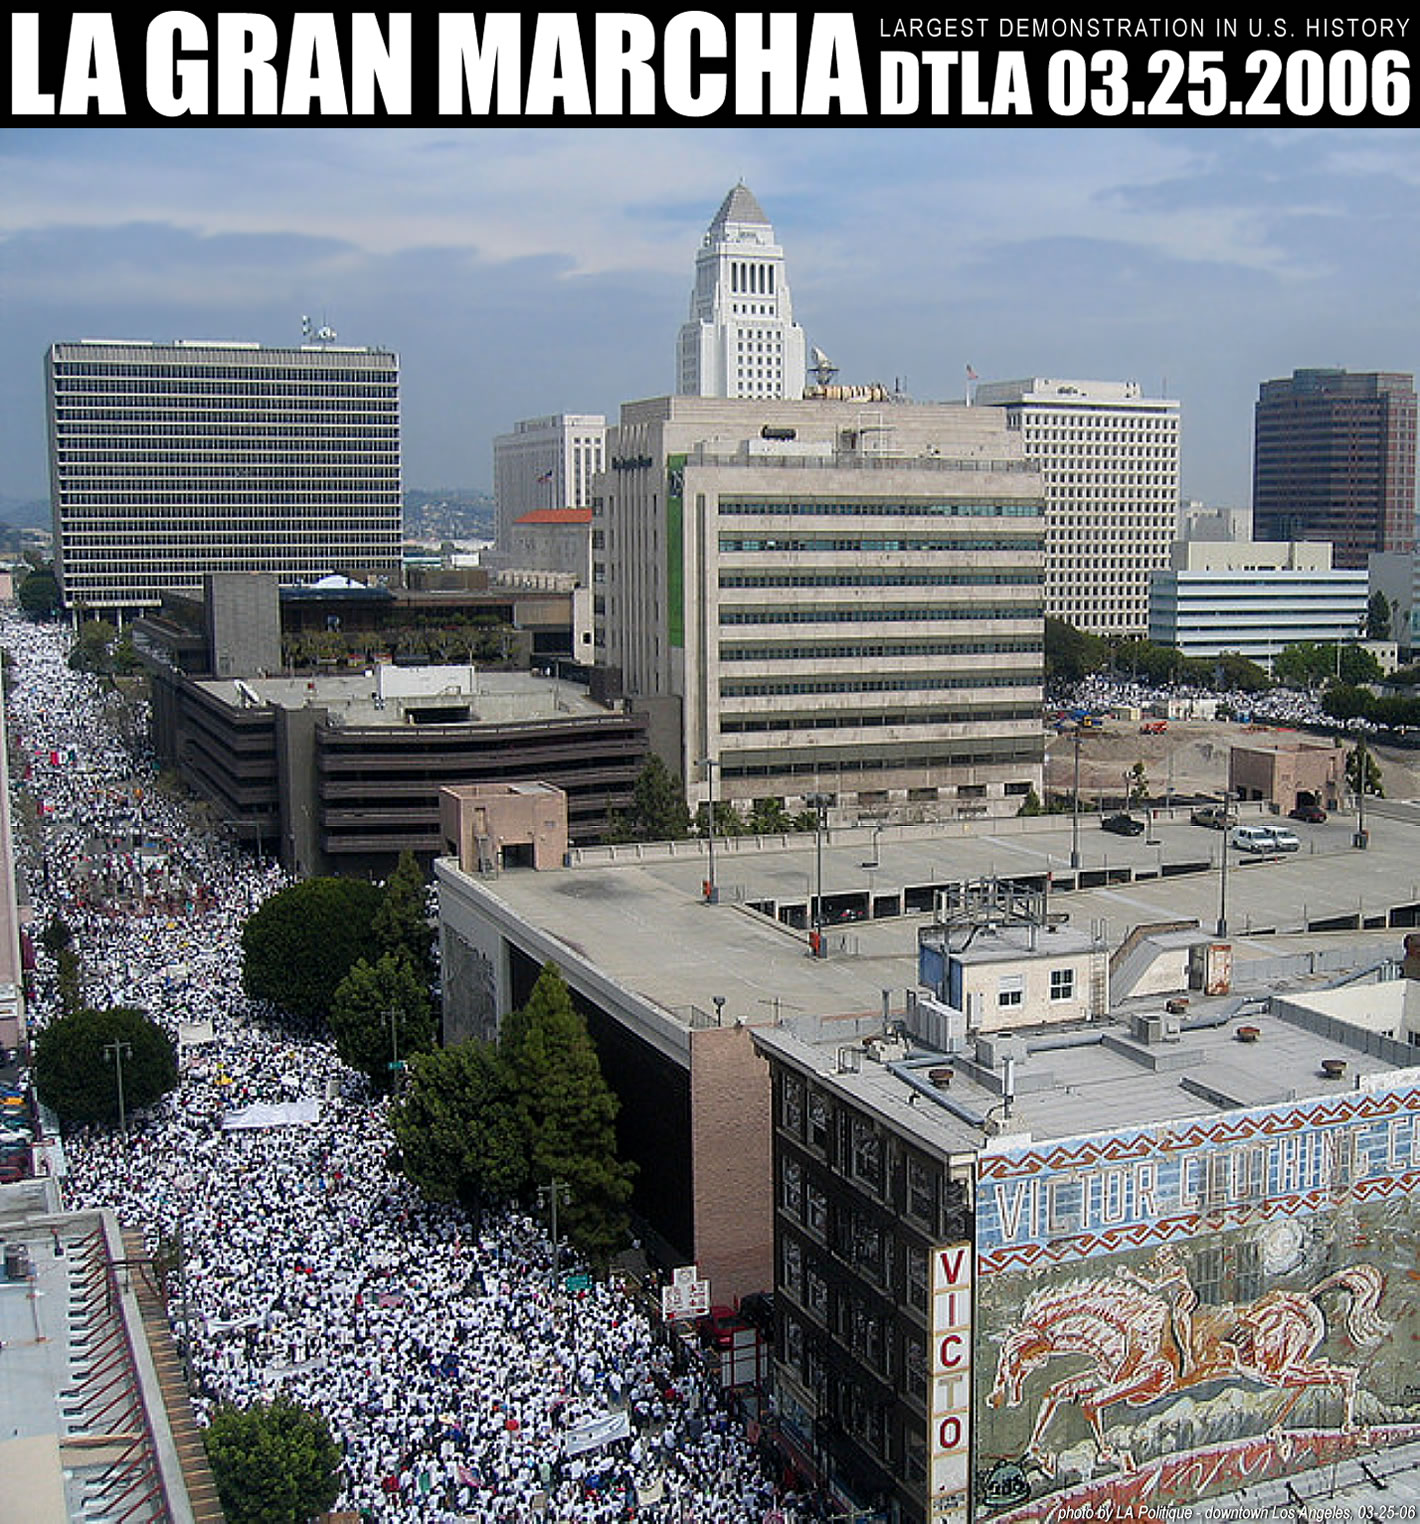 Los Angeles Latinos surround L.A. City Hall during La Gran Marcha on March 25, 2006.